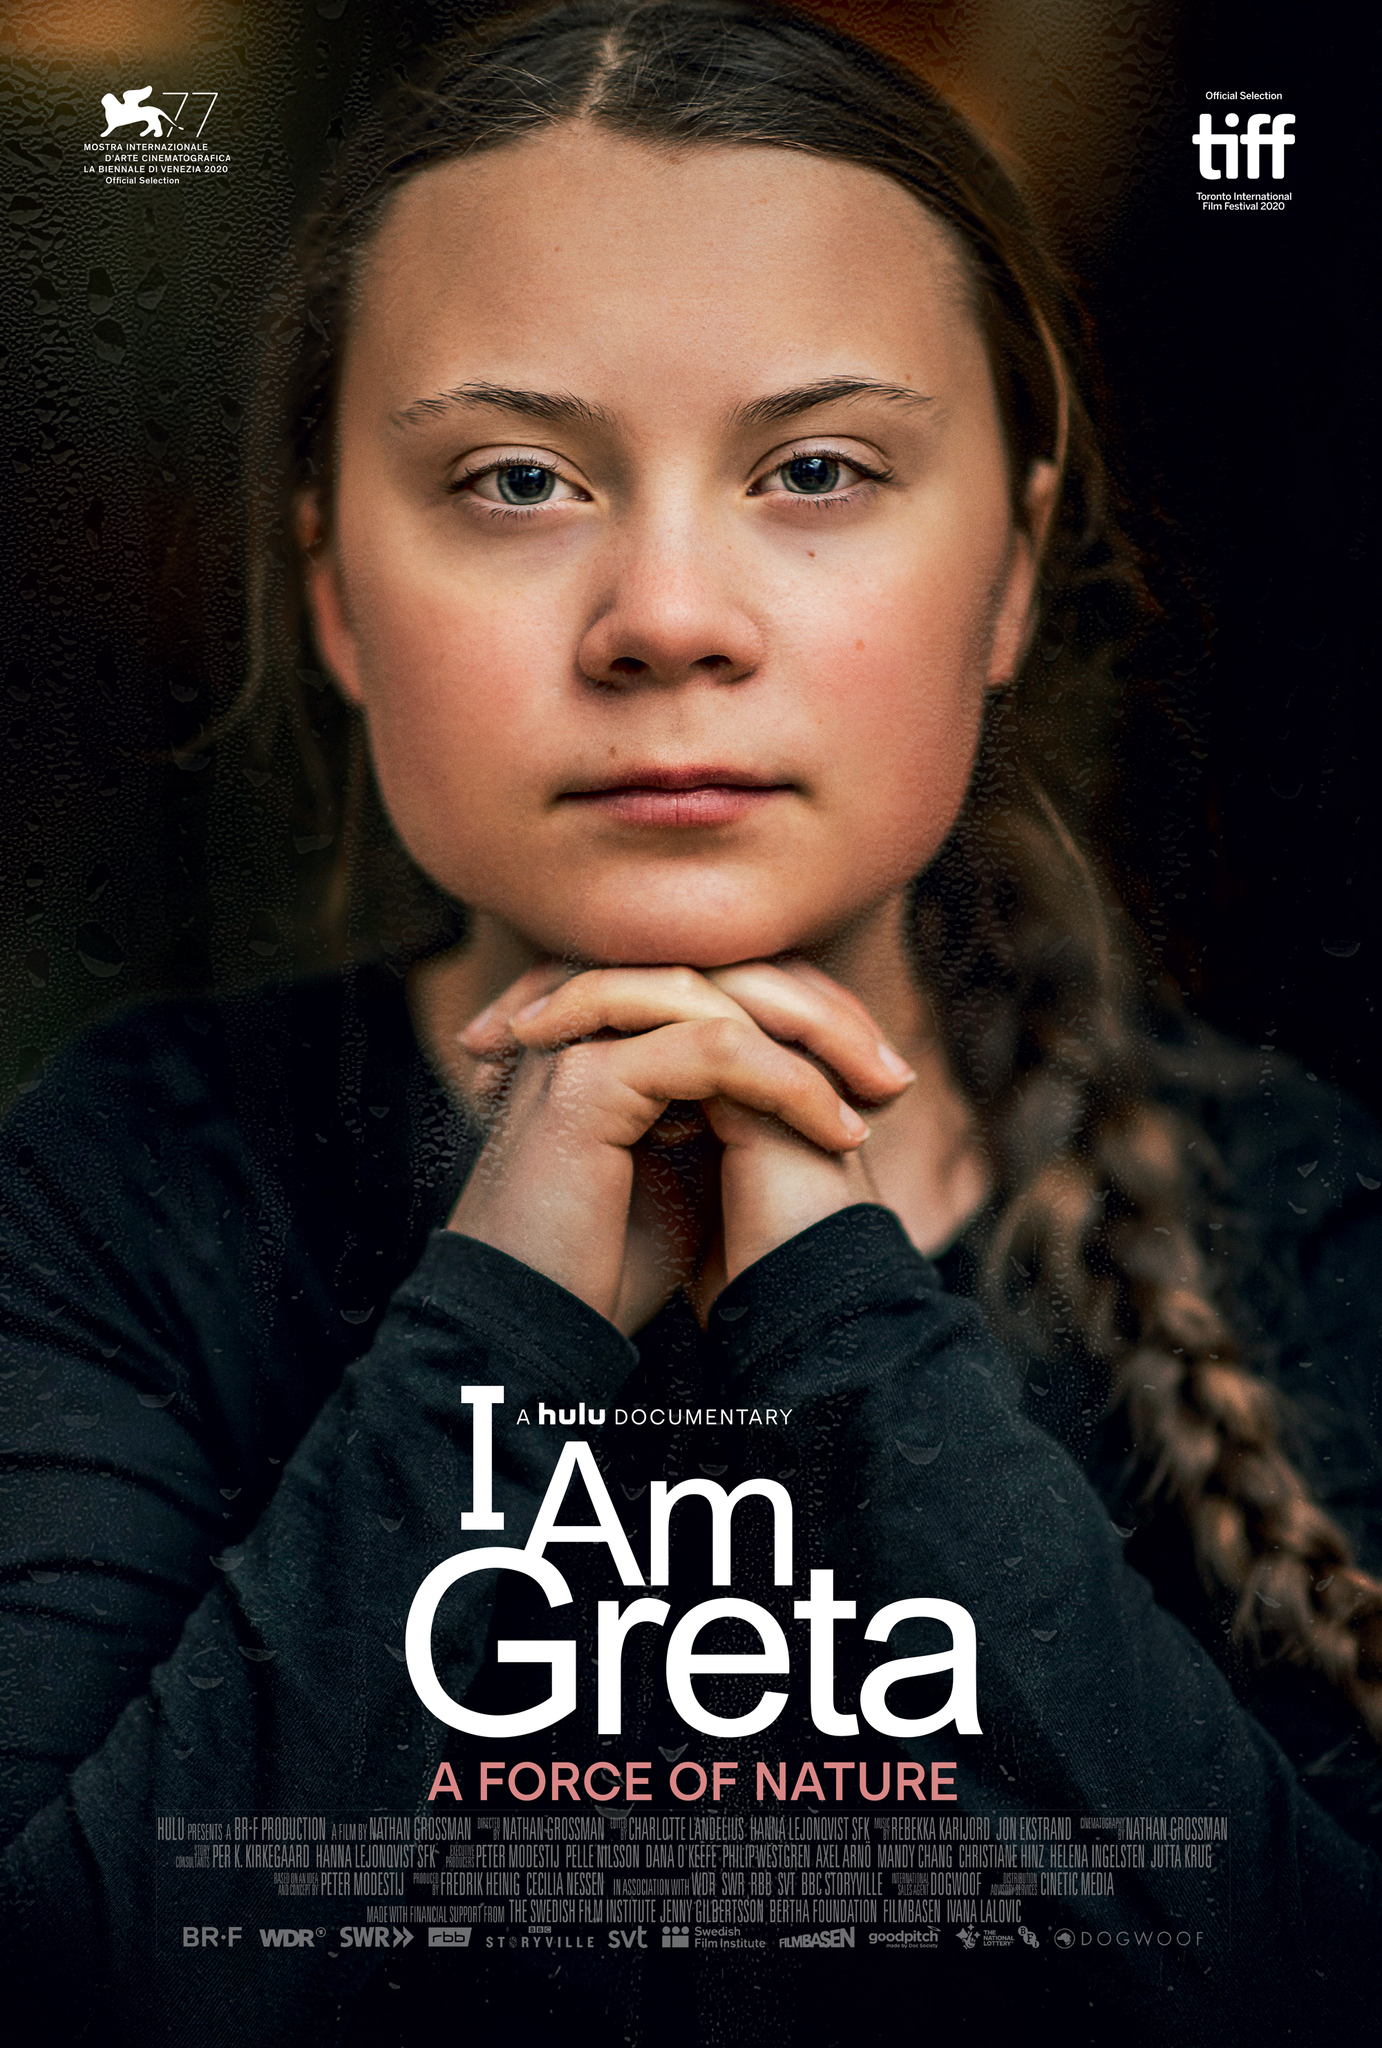 A film poster for the documentary I Am Greta, with a portrait of Greta Thunberg looking at the camera, resting her head on her interlocked fingers. The words I Am Greta: A force of nature appear over the image.